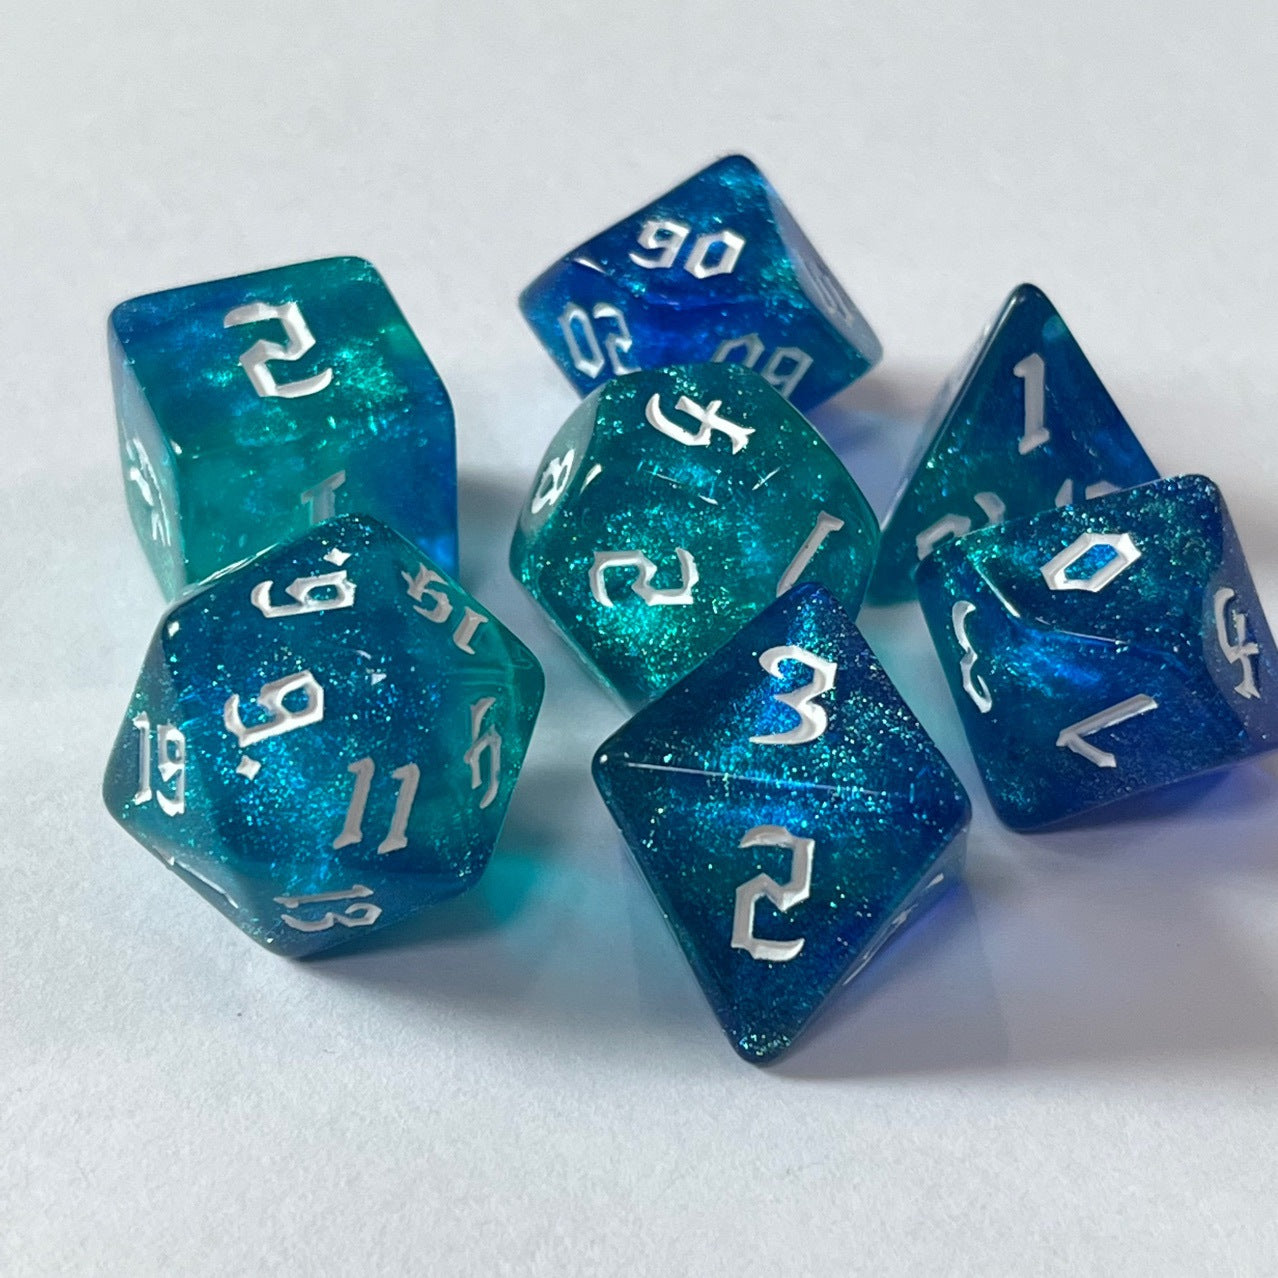 FREE Today: New Font Water Blue Dice Set